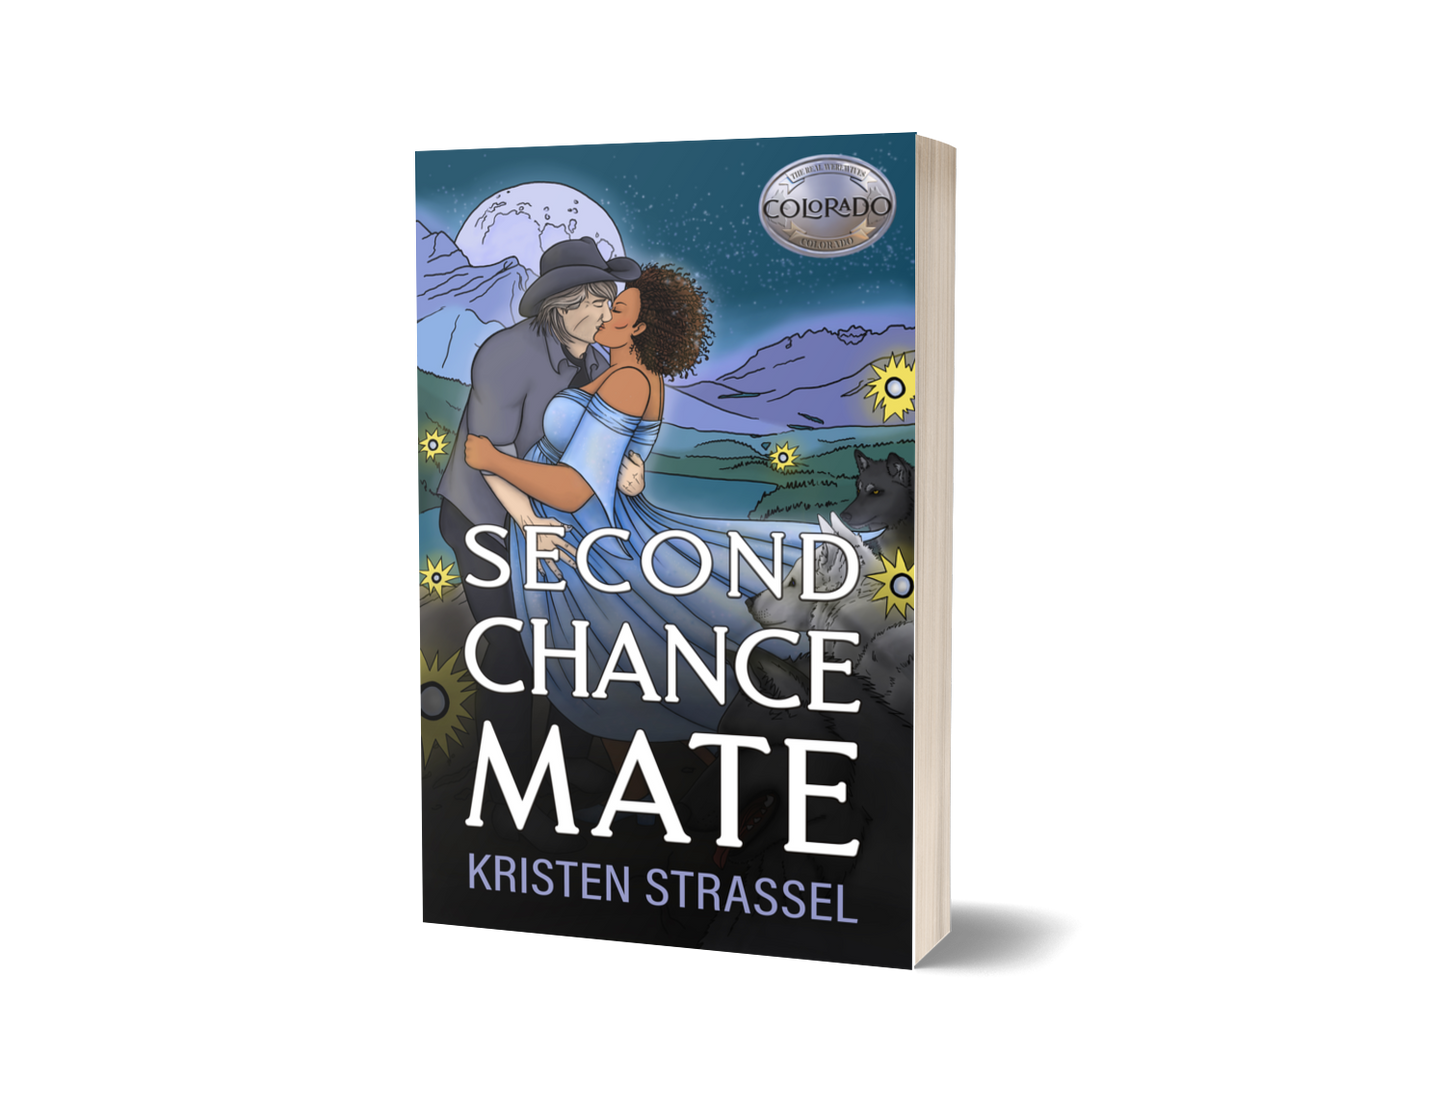 Second Chance Mate